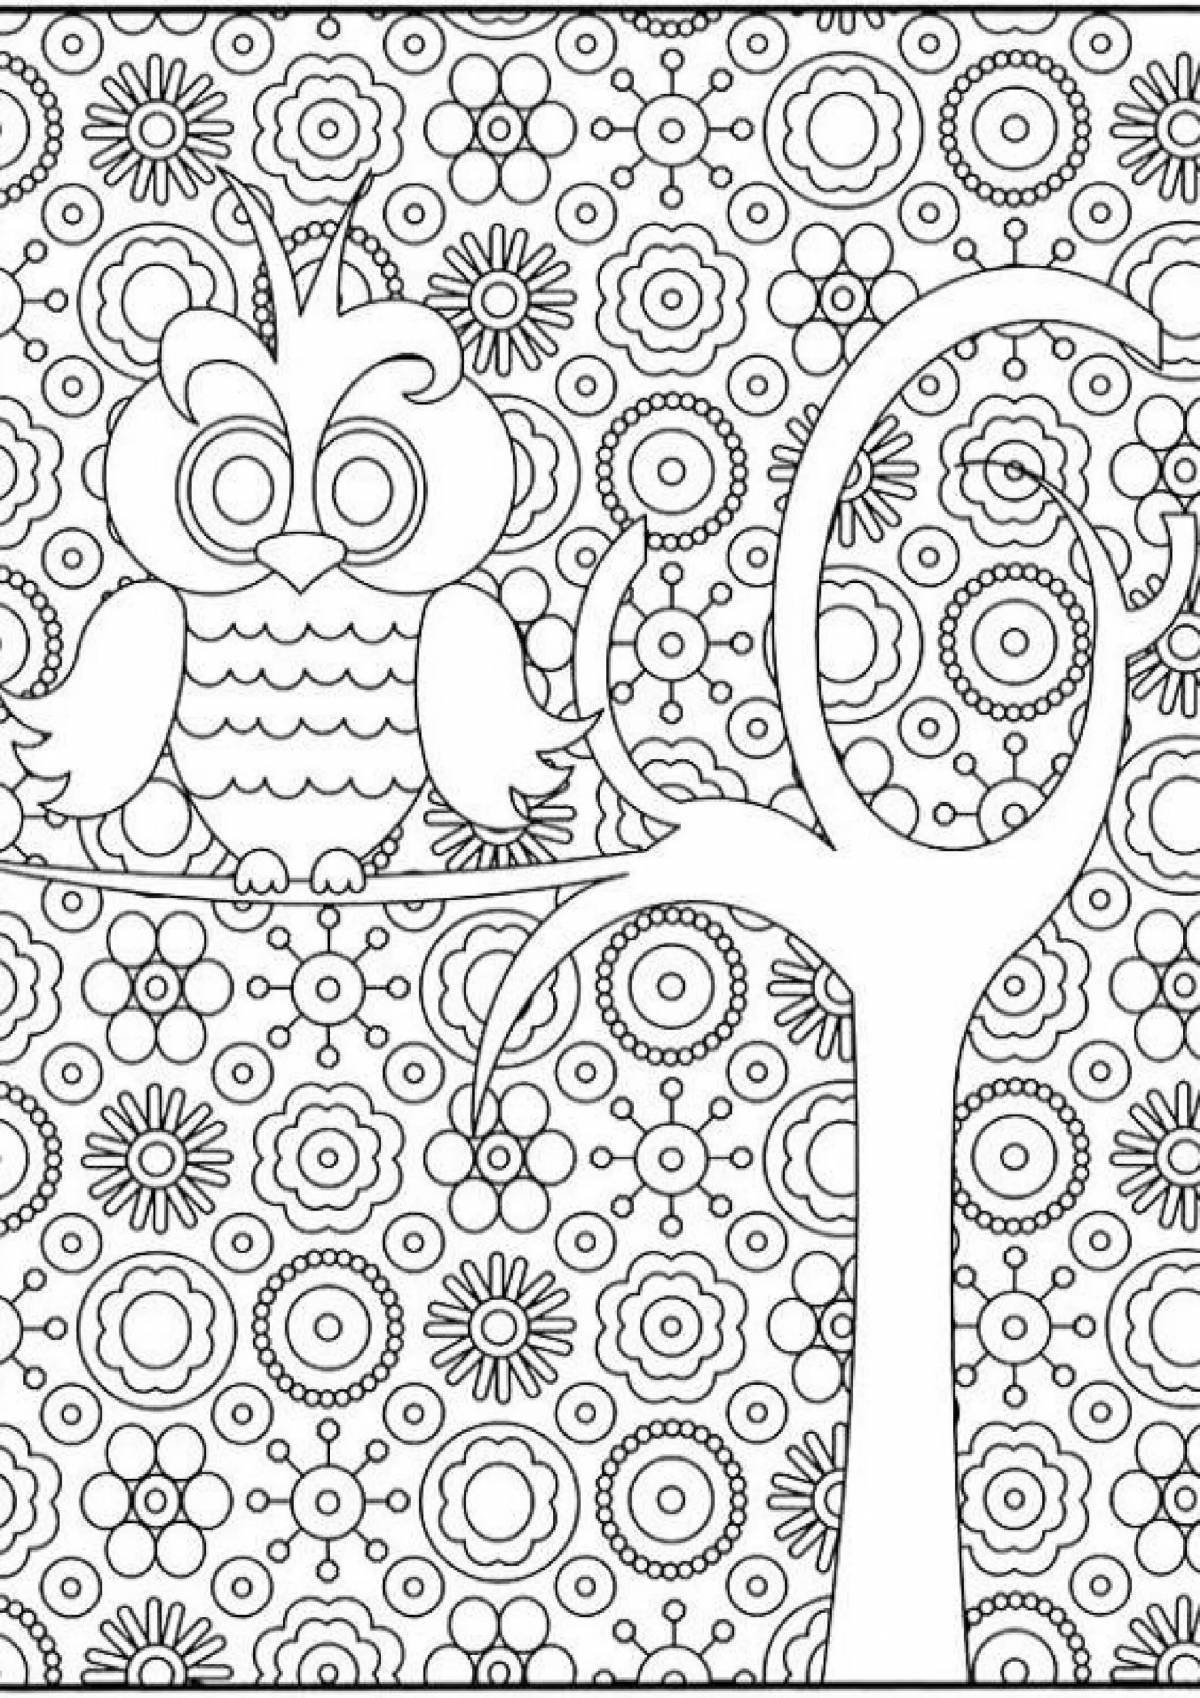 Fun coloring pages with small patterns